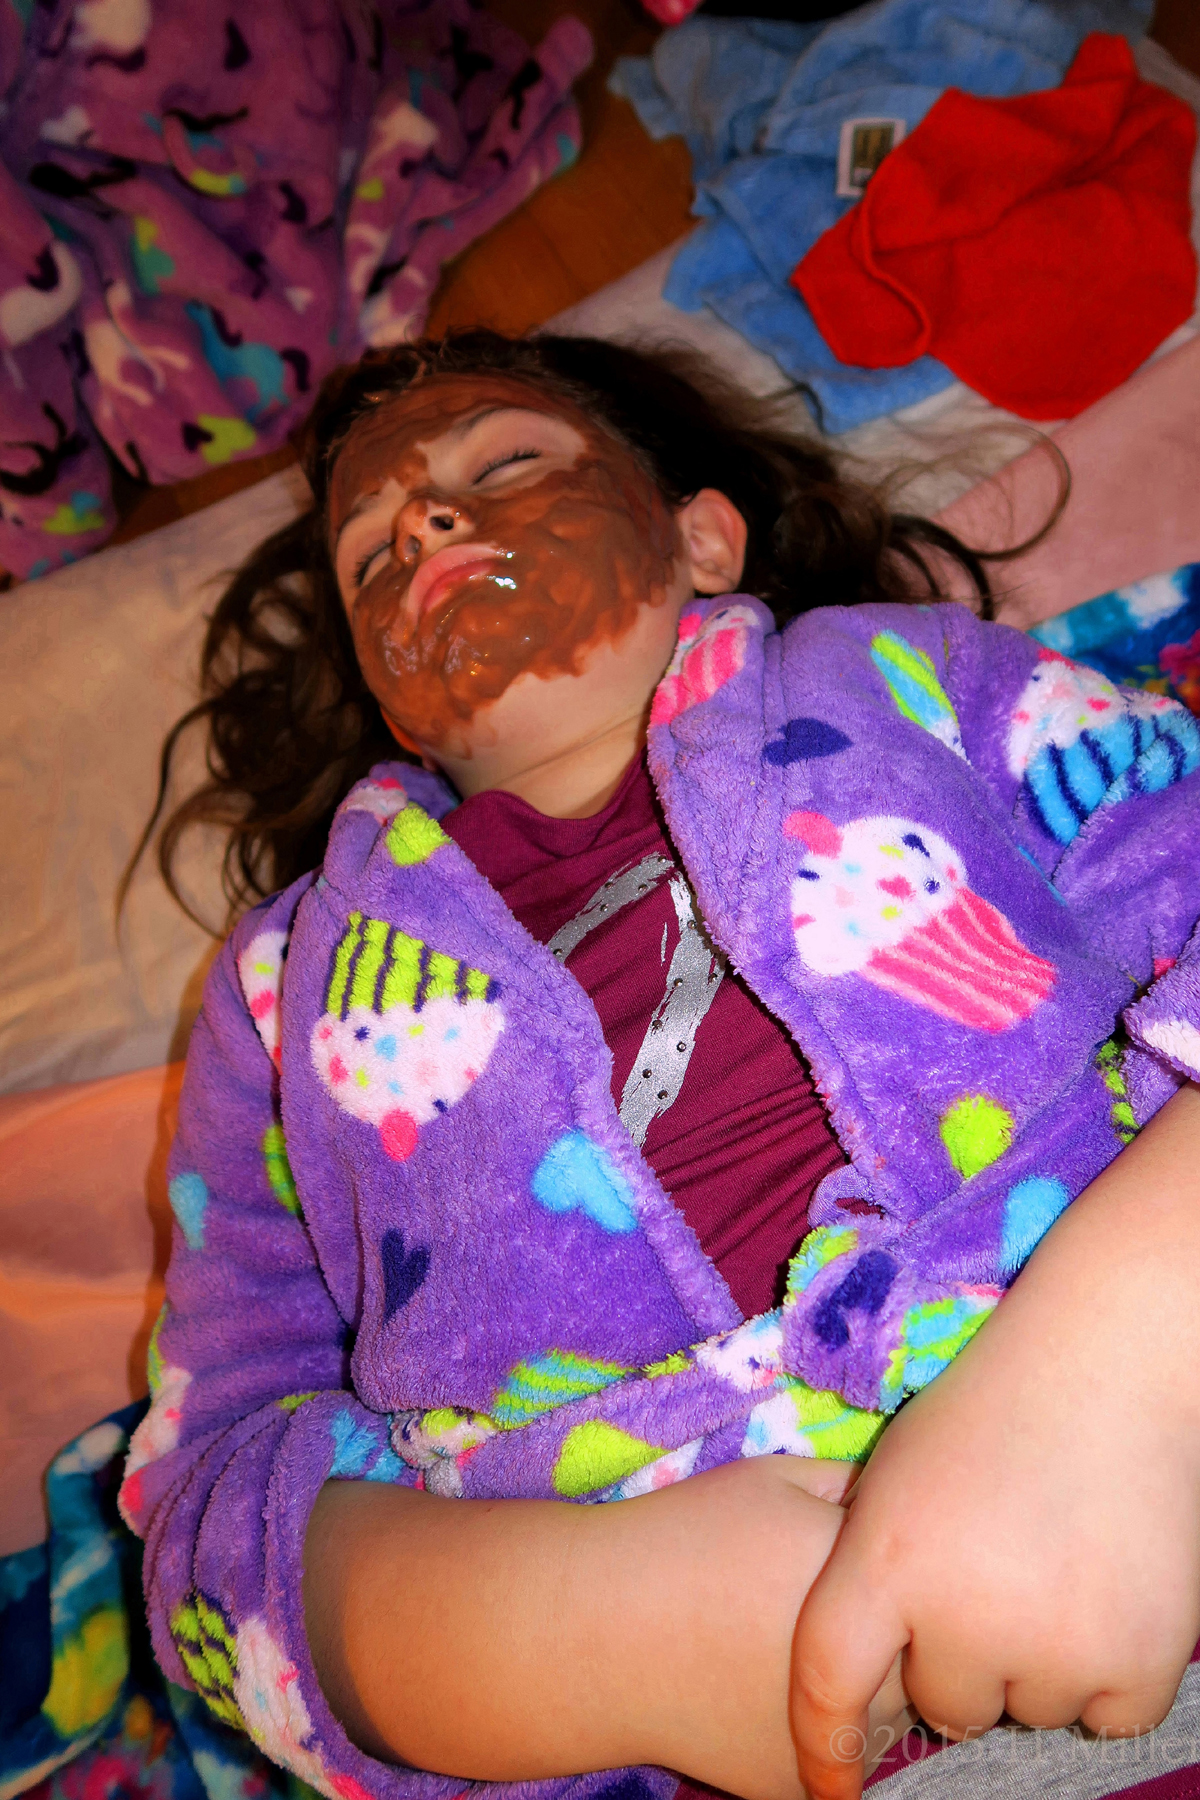 Her Chocolate Face Masque Is Awesome! 